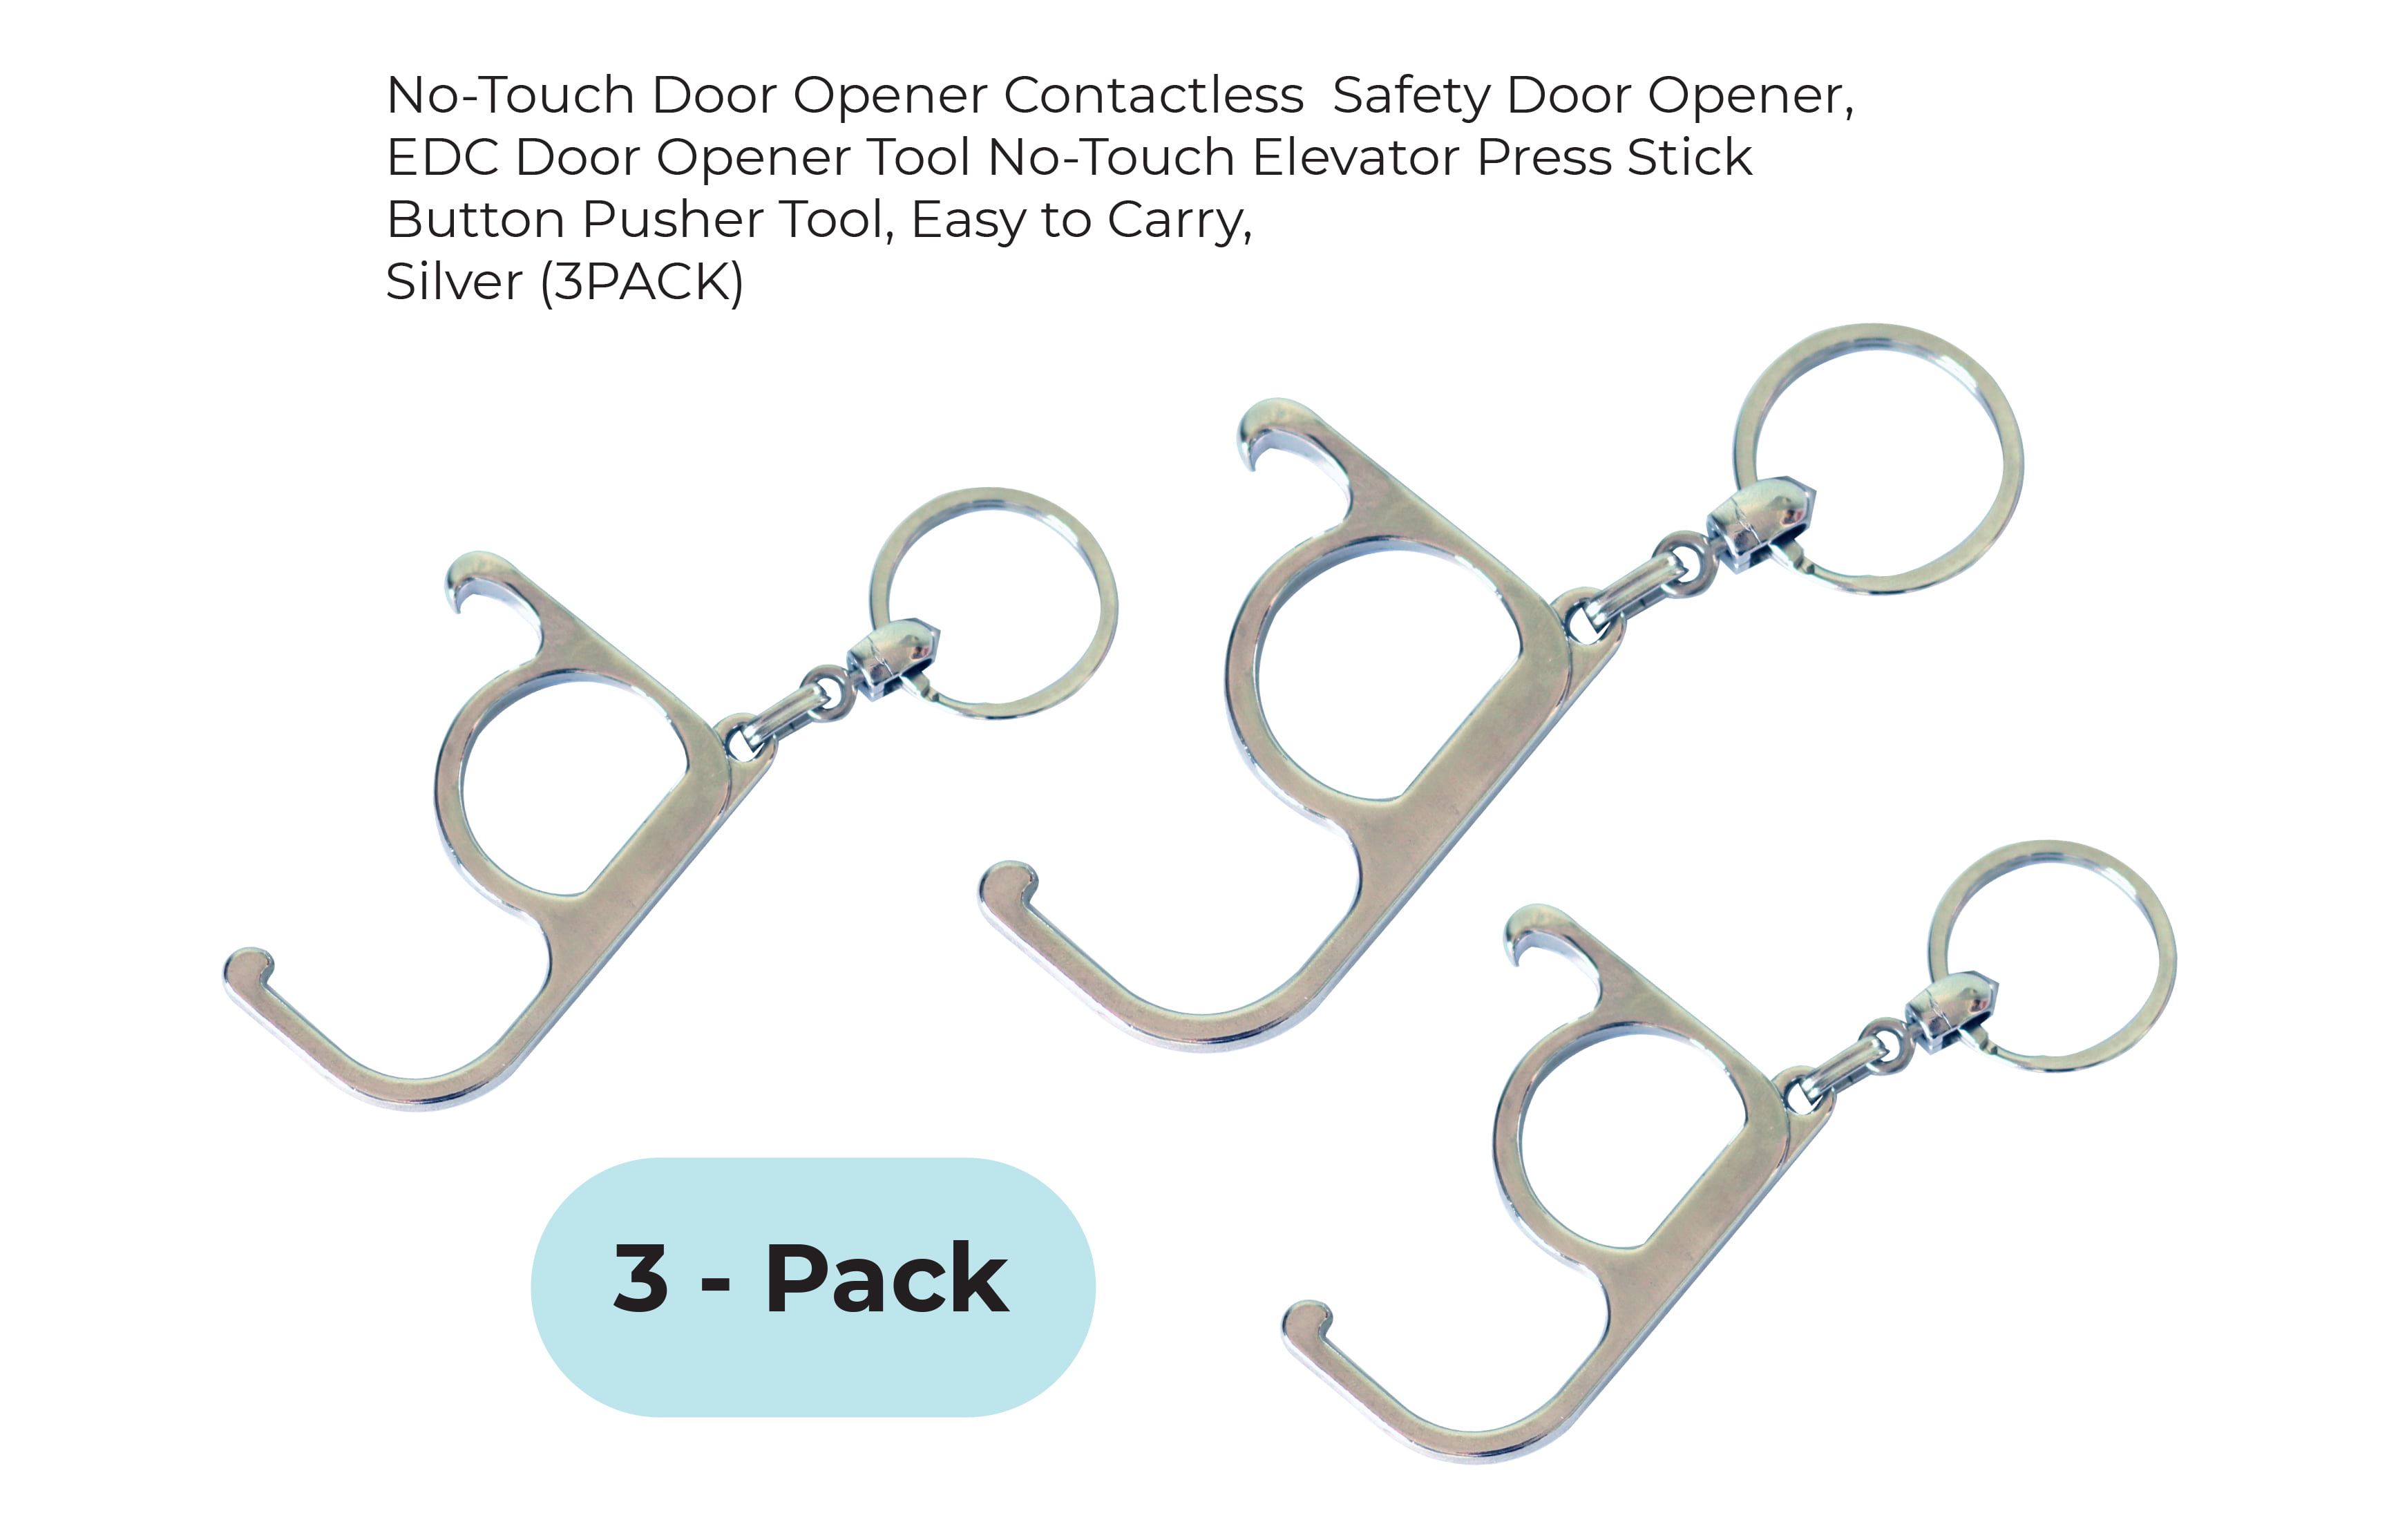 Touchless Door Opener Puller Button Pusher Tool Hands-Free No Touch Keychain 4pk 